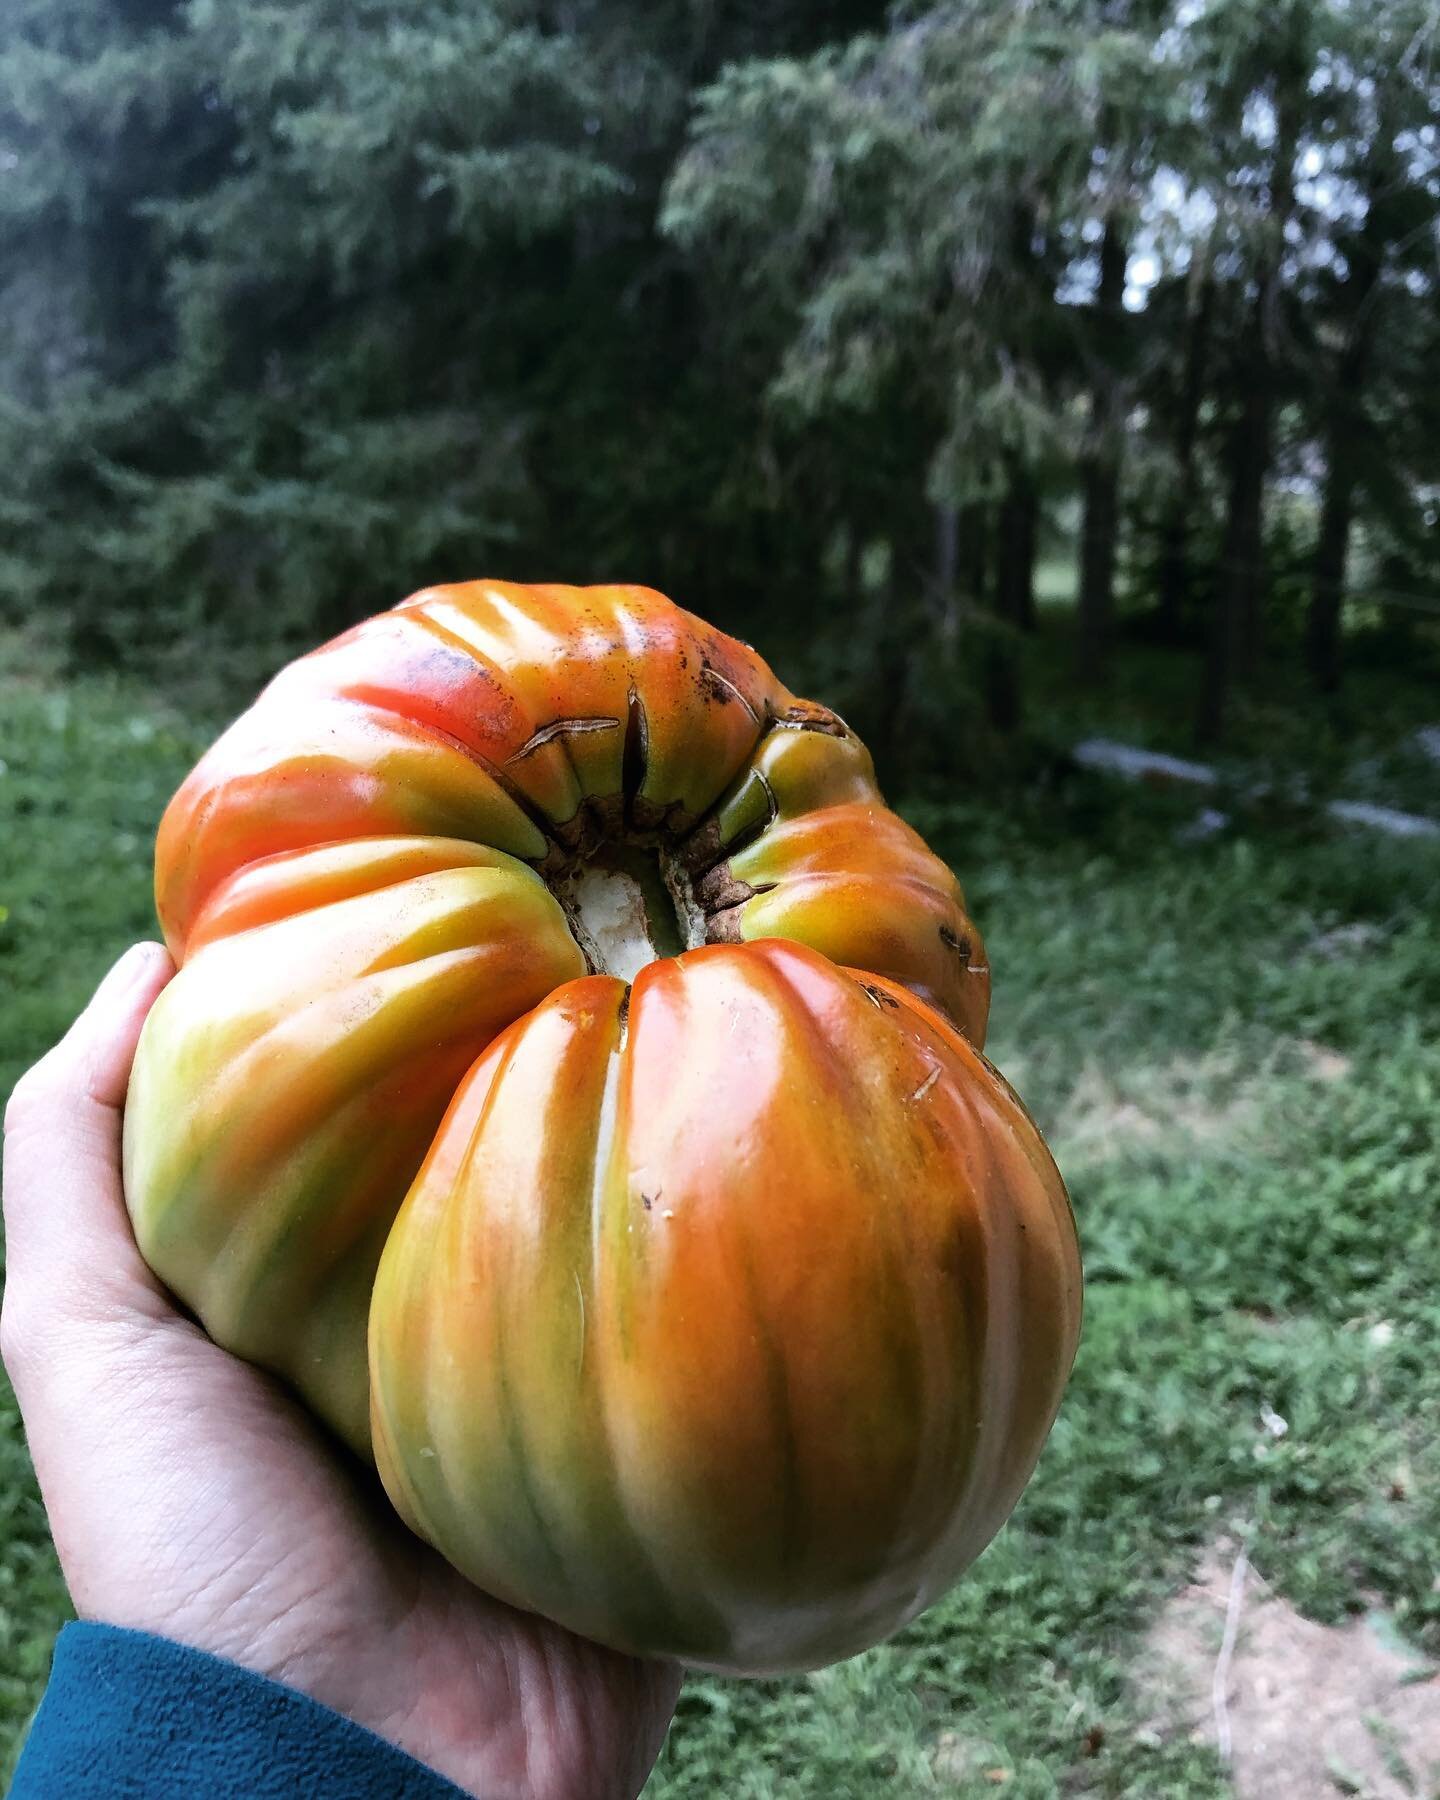 Can&rsquo;t grow anything Zone2b you say? @blackriverforagingco just pulled this out of the community garden ❤️ I&rsquo;ll be eating this single tomato for a week 😂